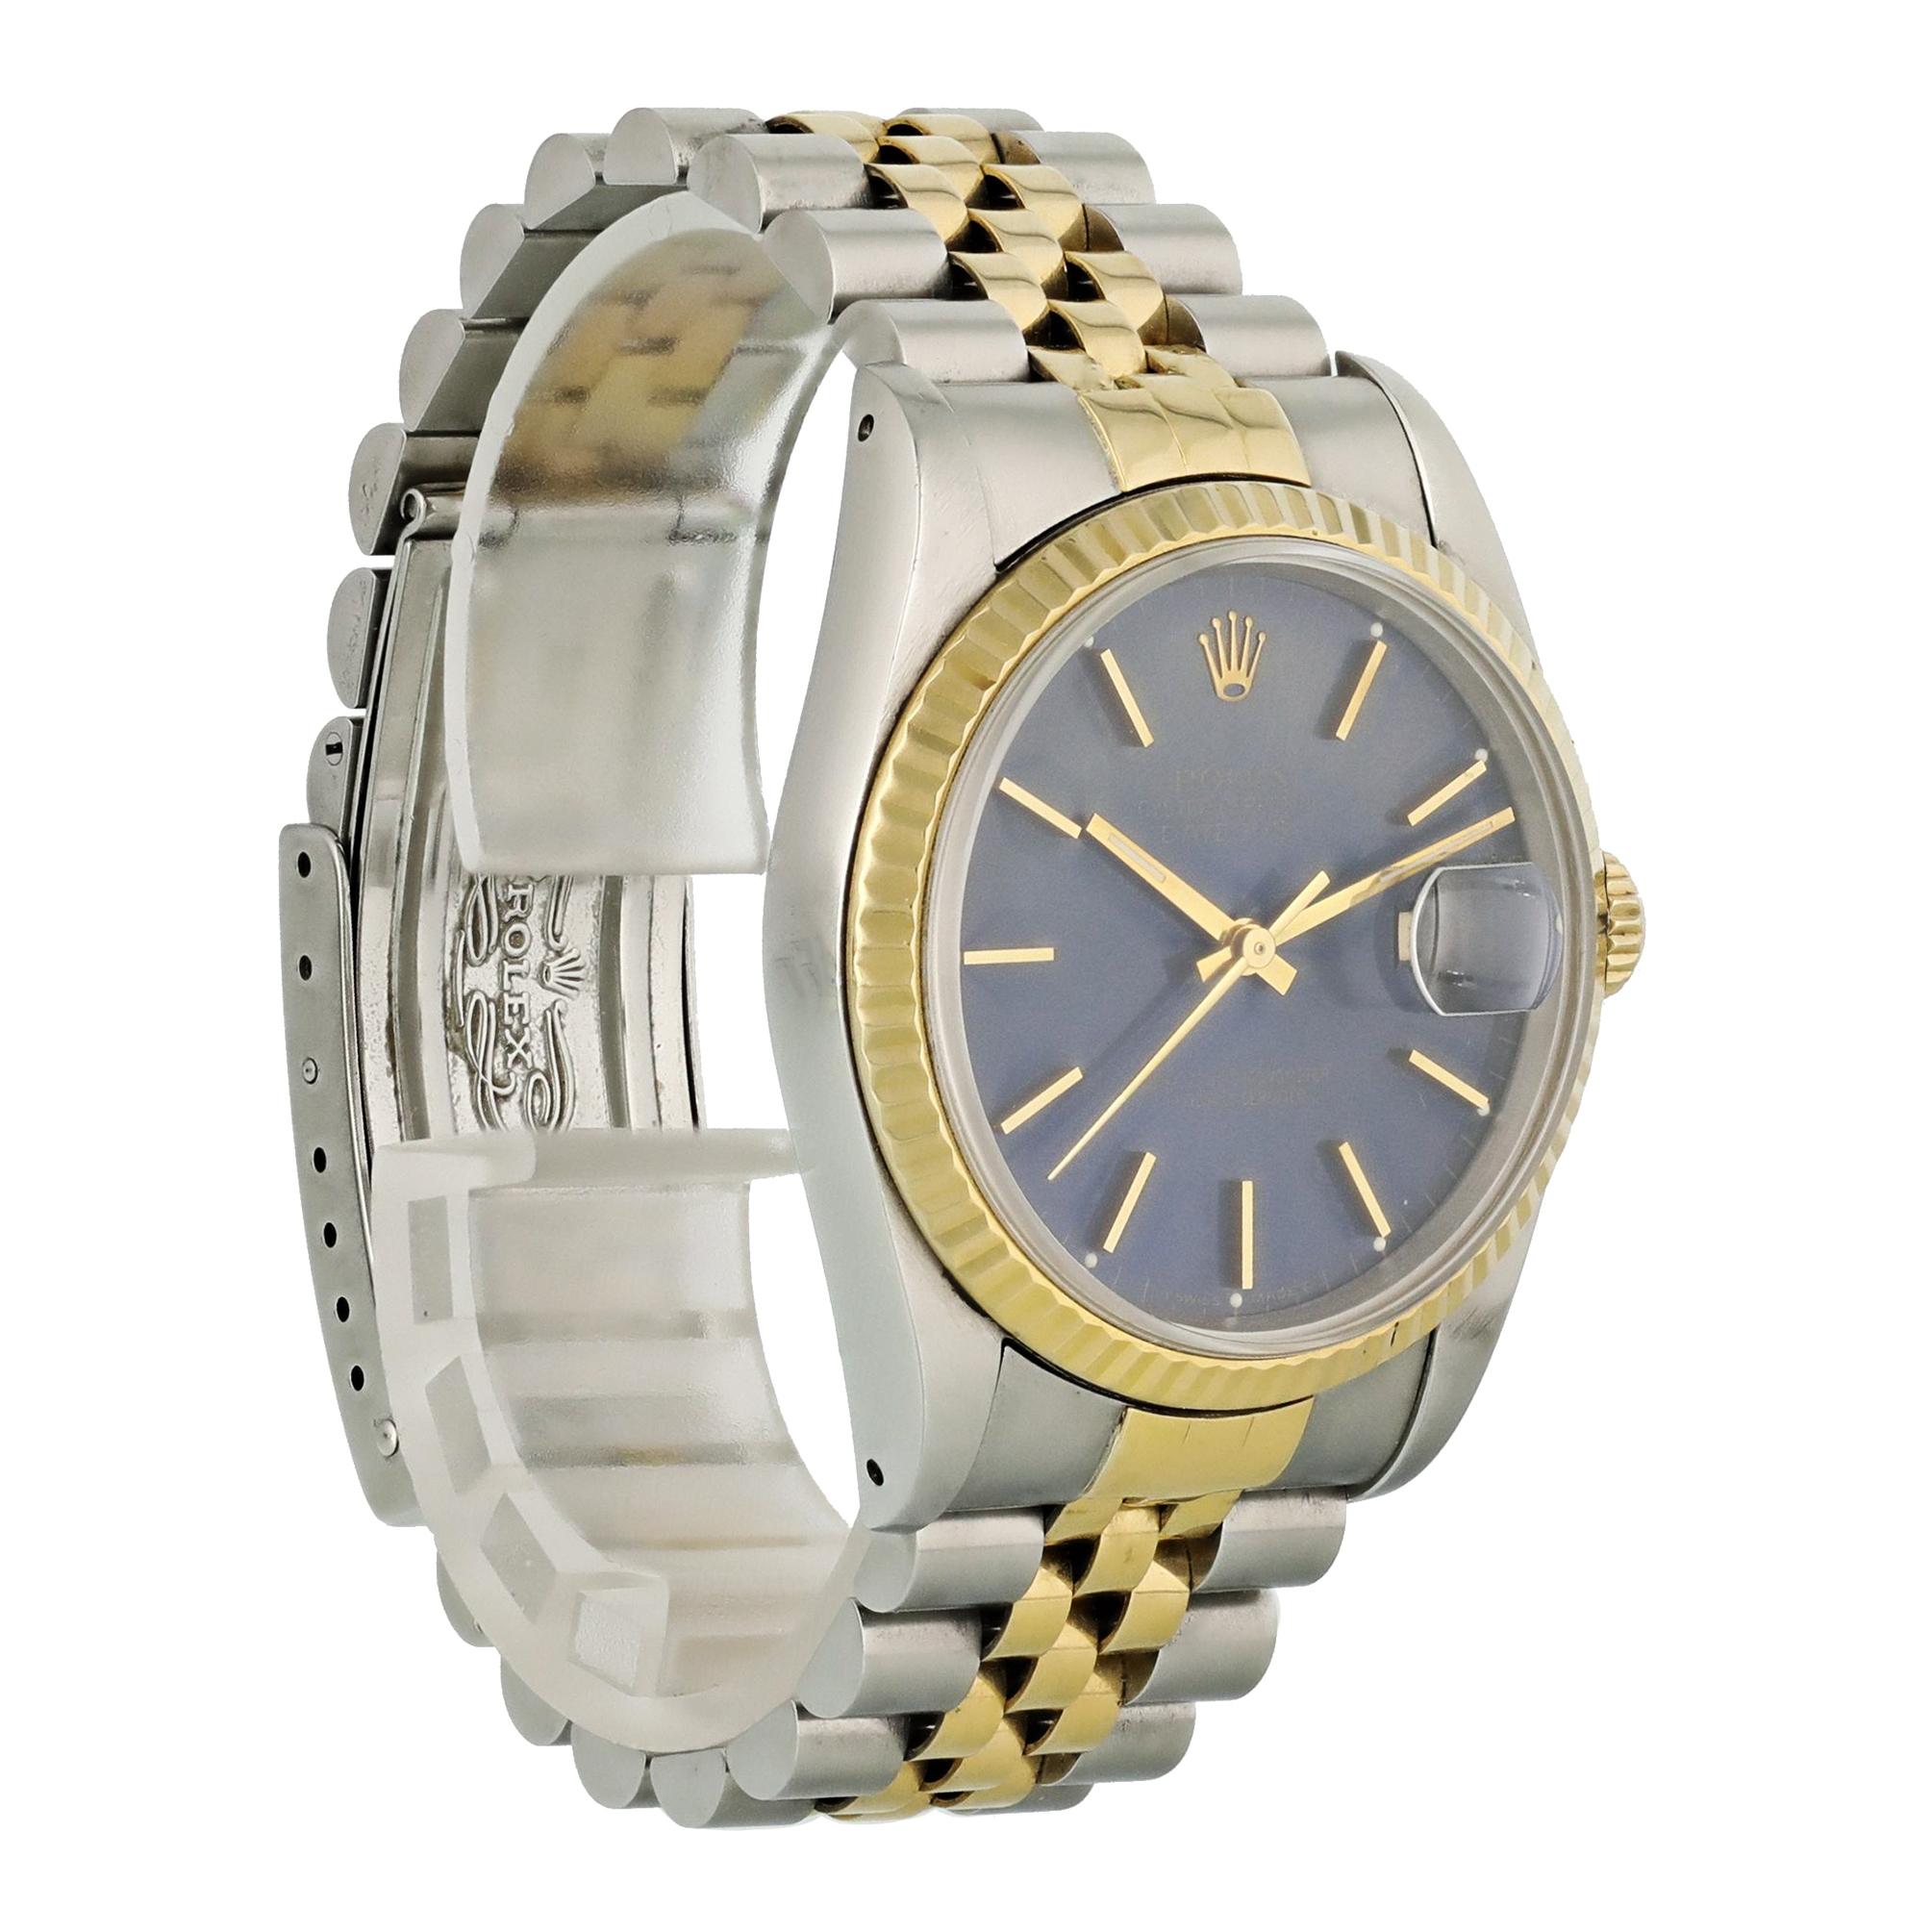 Rolex Datejust 16233 Men Watch. 
36mm Stainless Steel case. 
Yellow Gold Stationary bezel. 
Black dial with gold hands and index hour markers. 
Minute markers on the outer dial. 
Date display at the 3 o'clock position. 
Stainless Steel Bracelet with